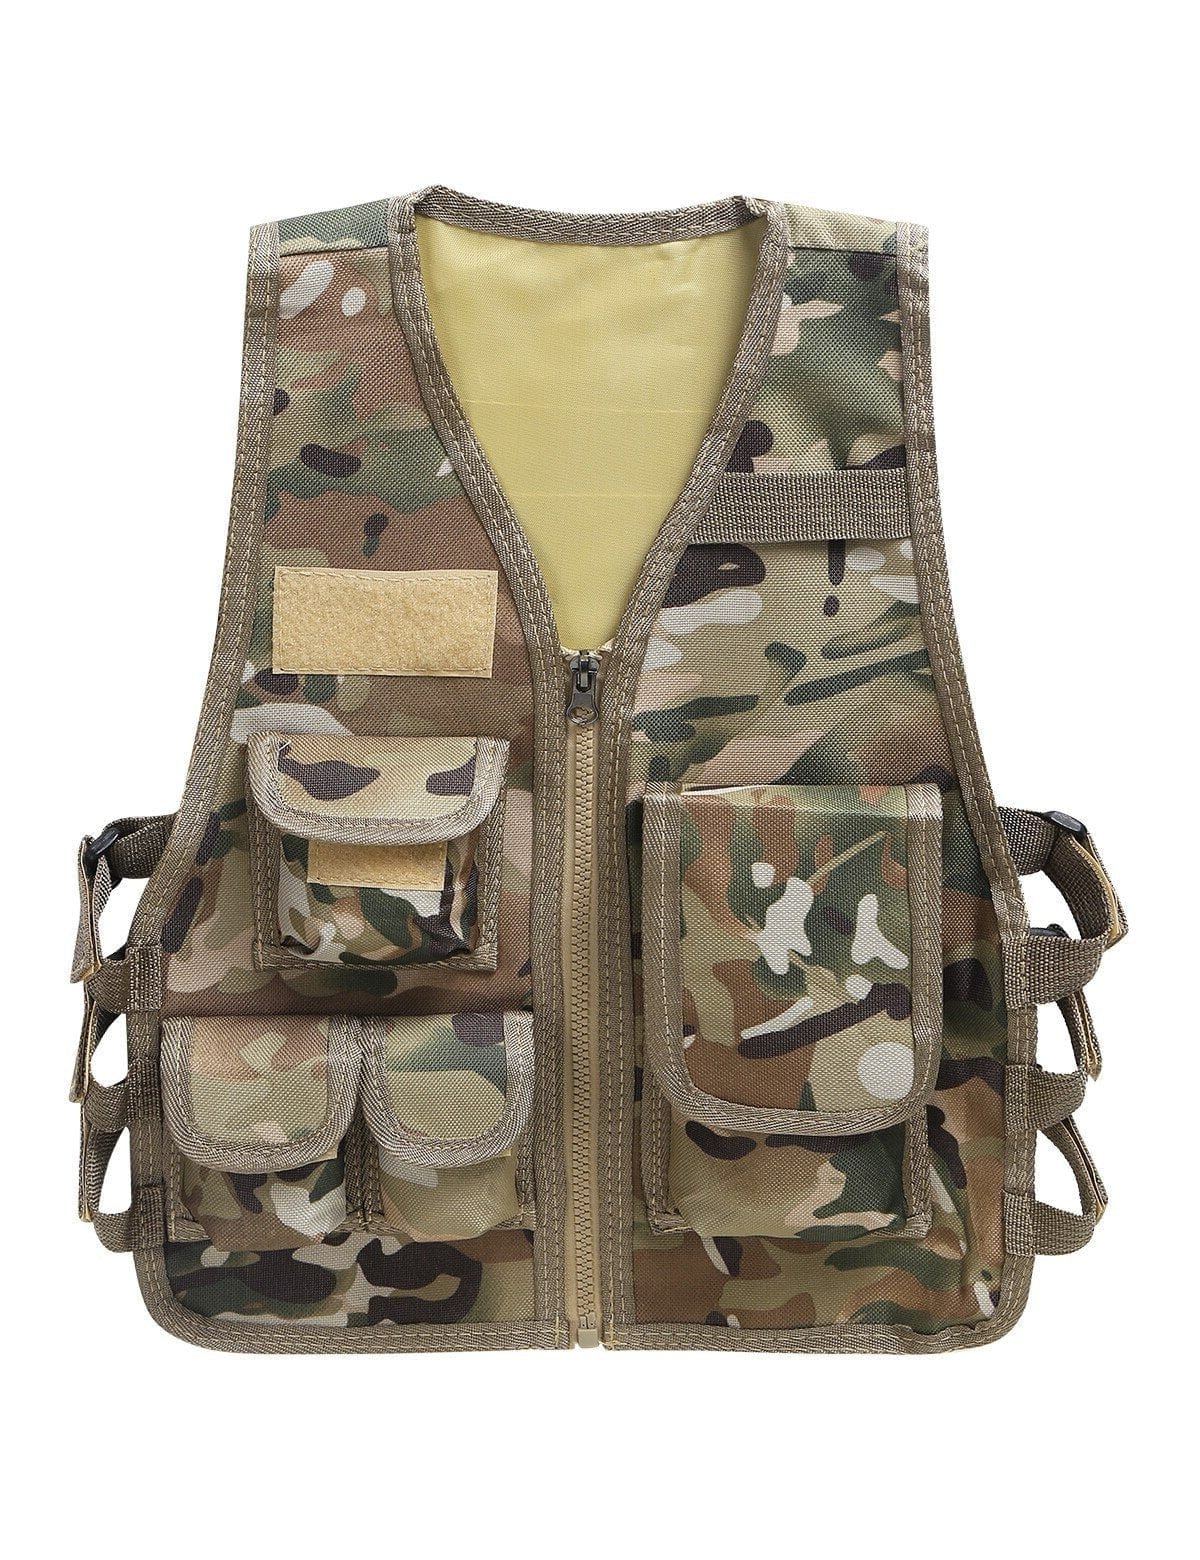 eventoloisirs 0 Camouflage CP / S Gilet enfant camouflage militaire FOS